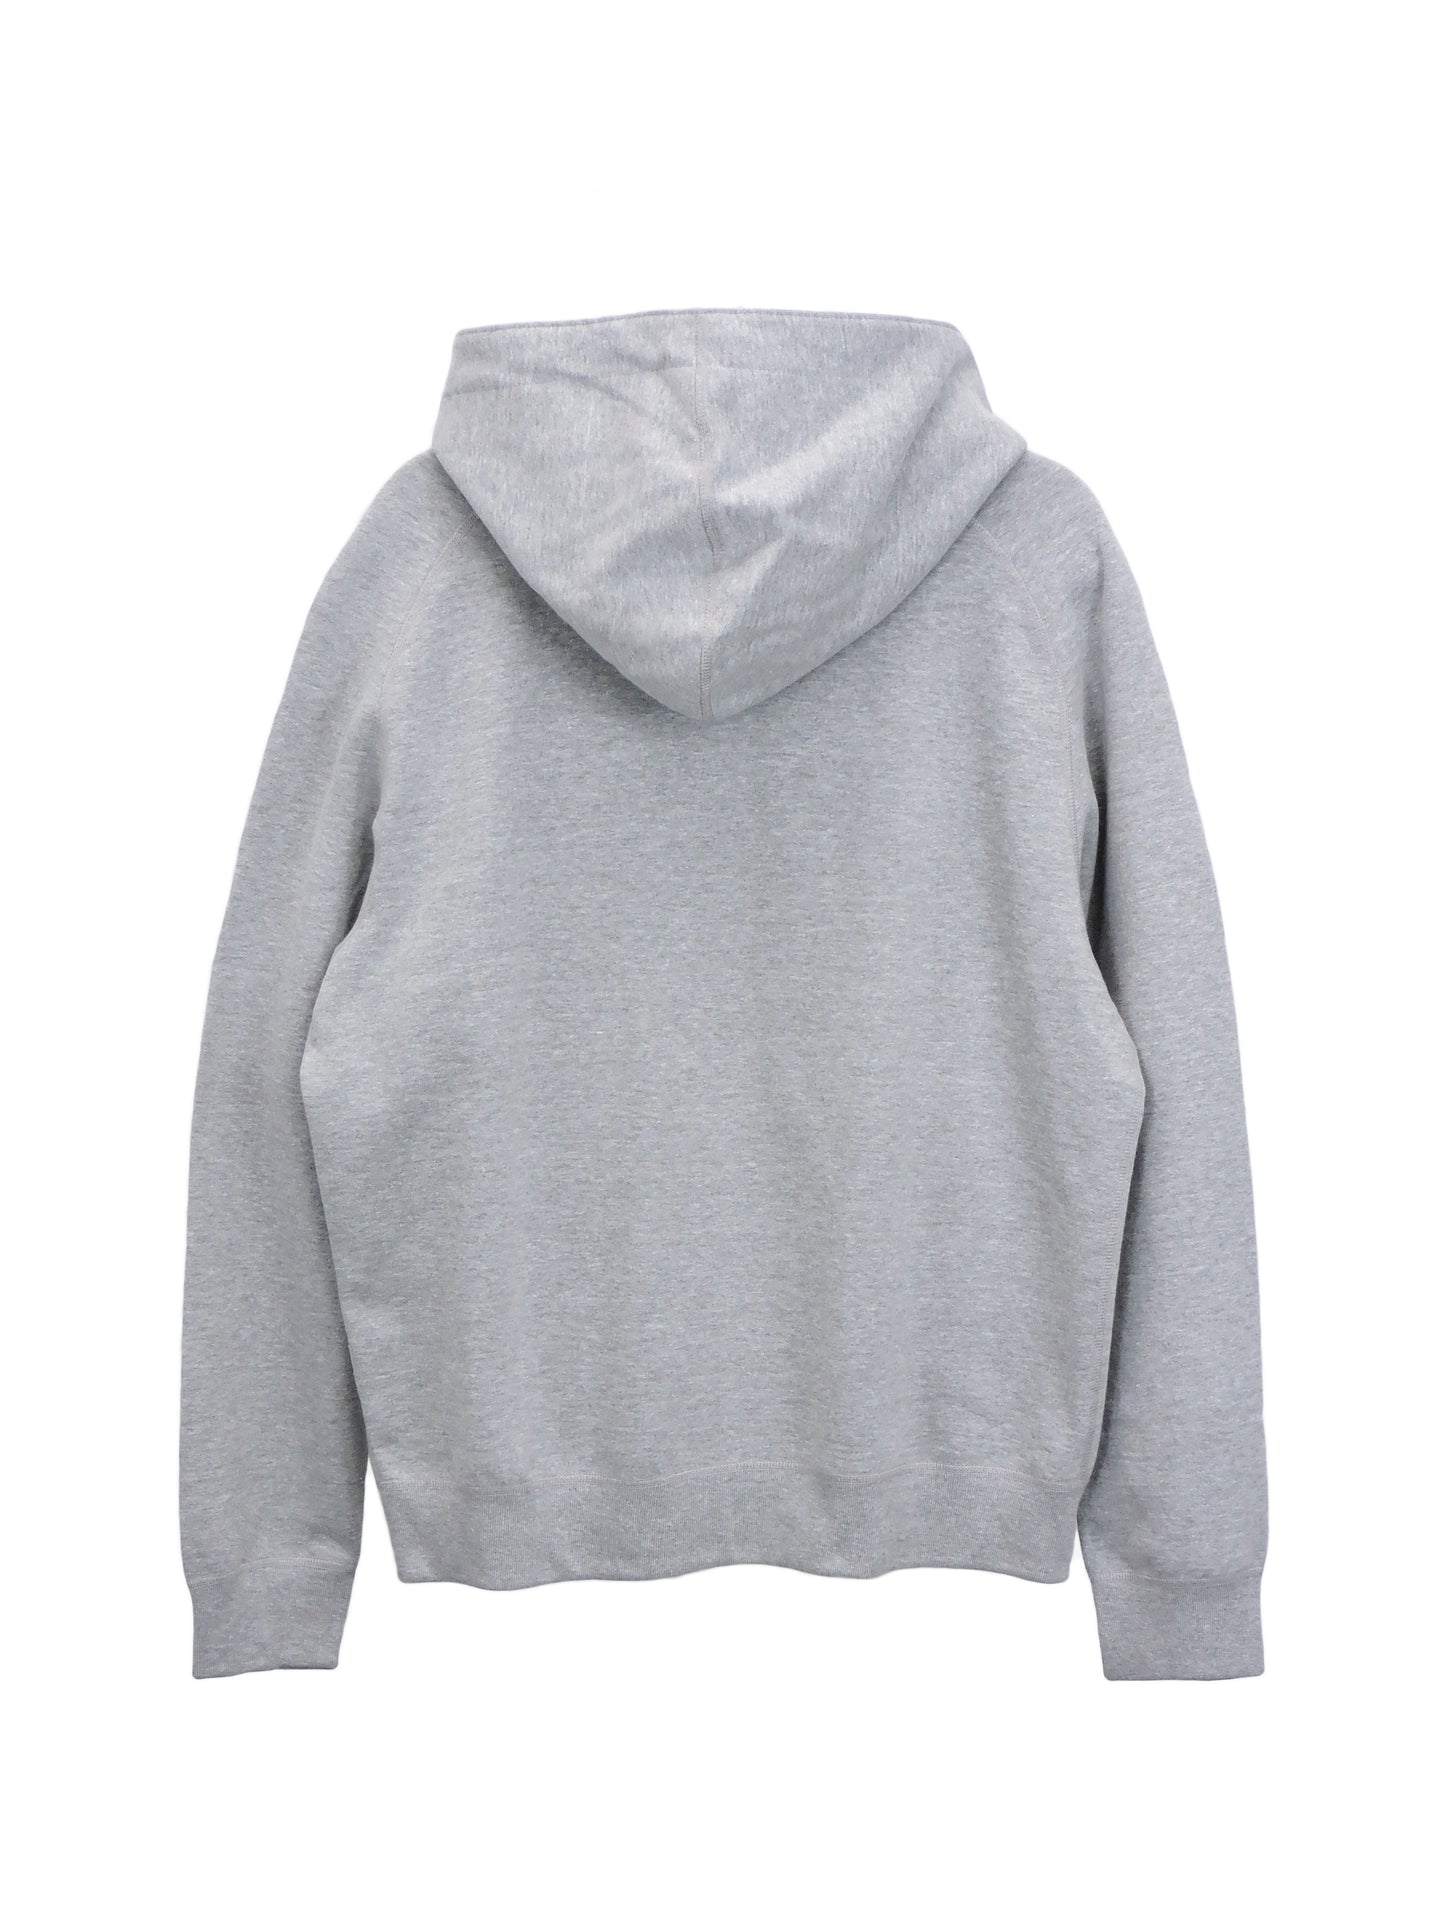 Back of Fleece Hoodie Showing Dense Fabric and Wide Fit